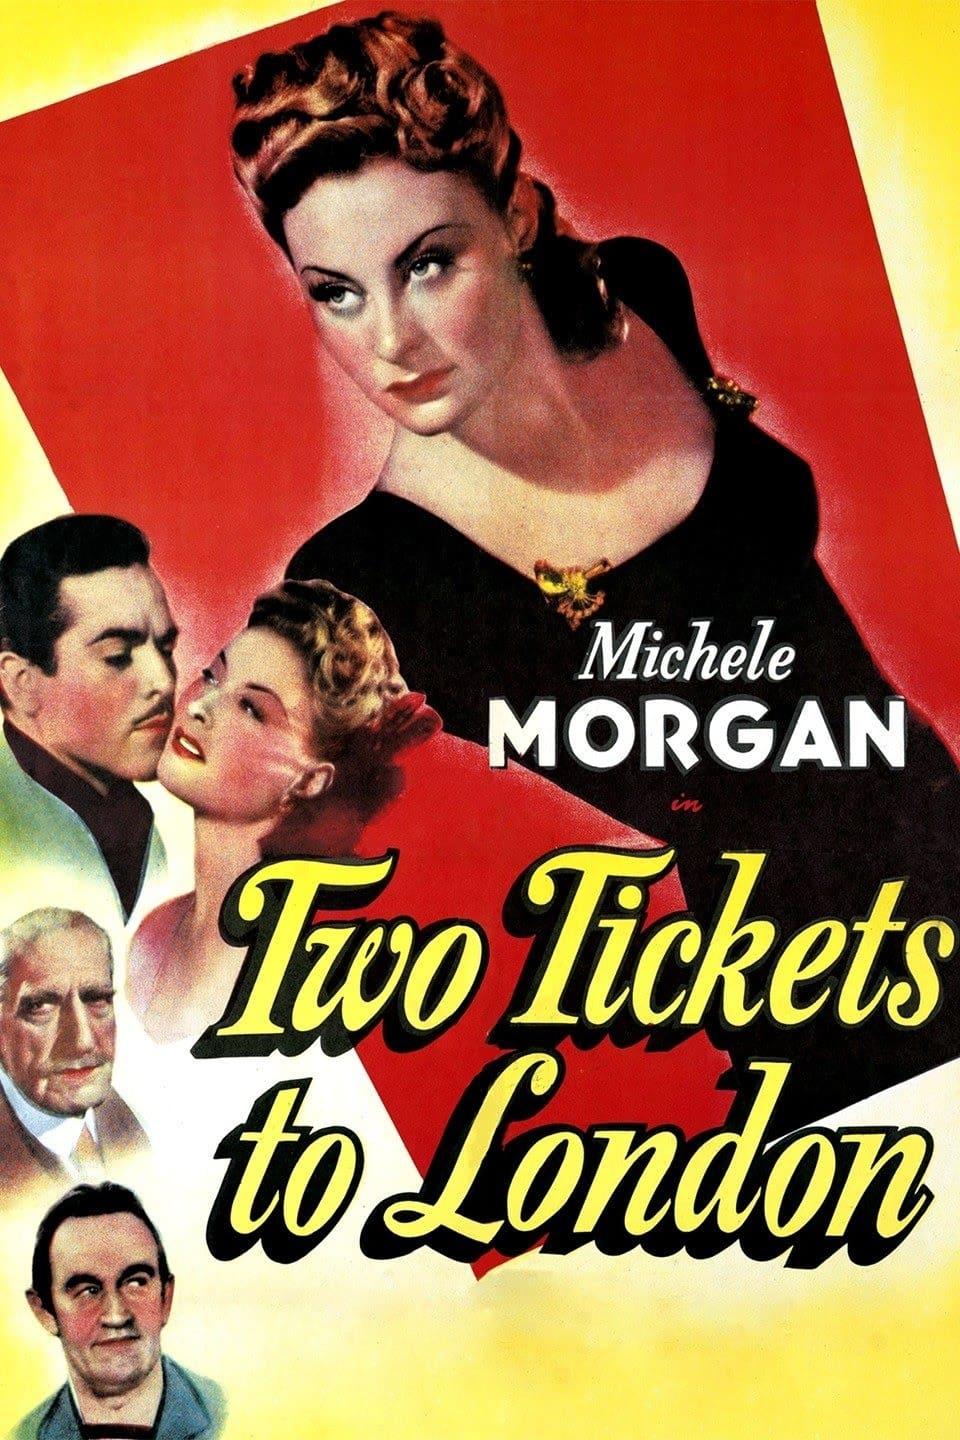 Two Tickets to London poster